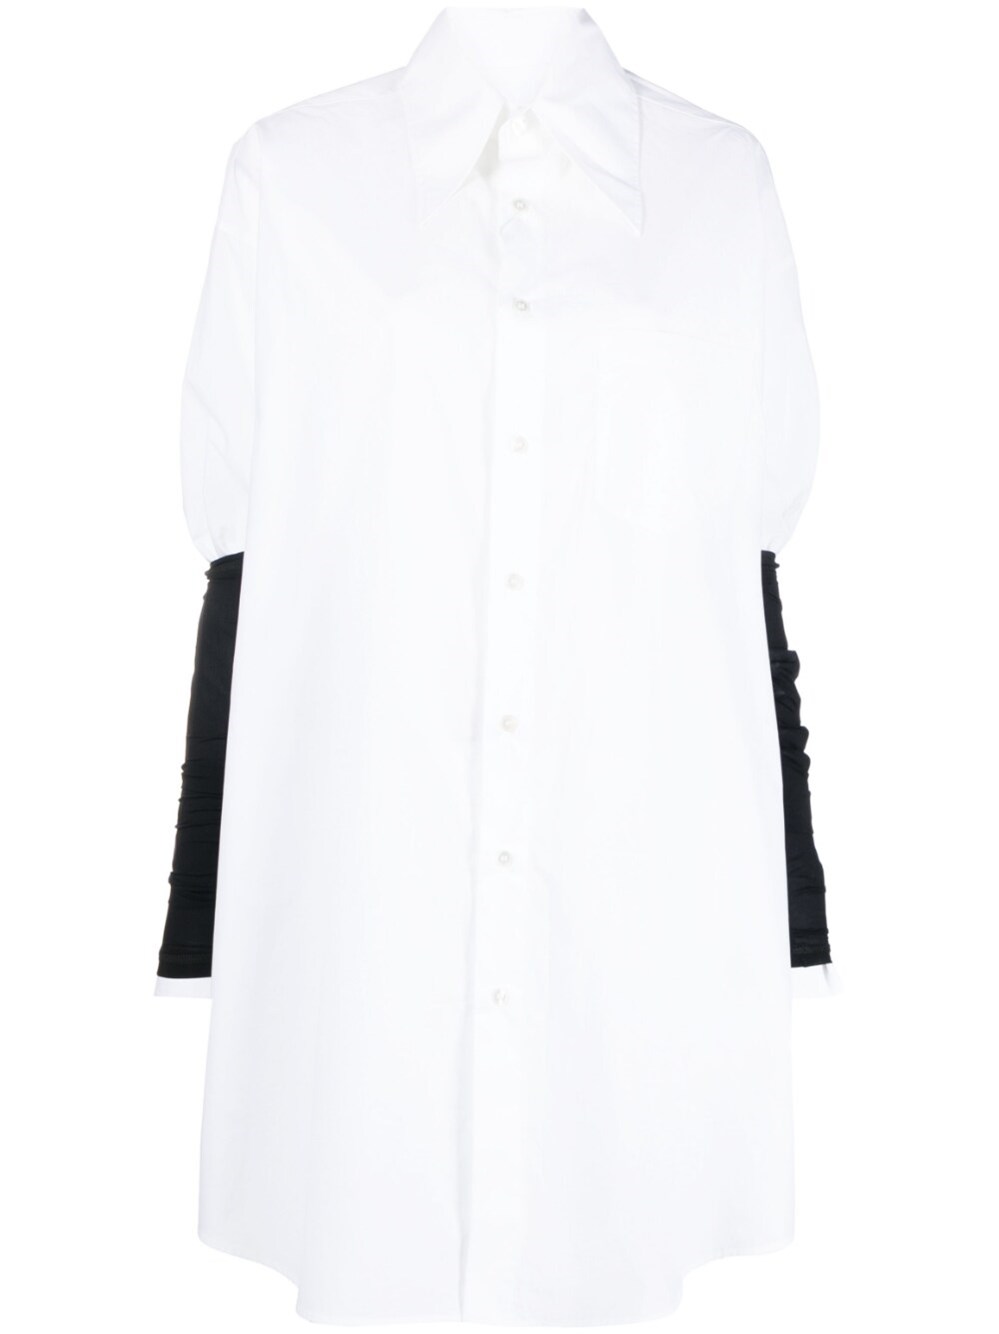 MM6 MAISON MARGIELA SHIRT WITH CONTRASTING SLEEVES